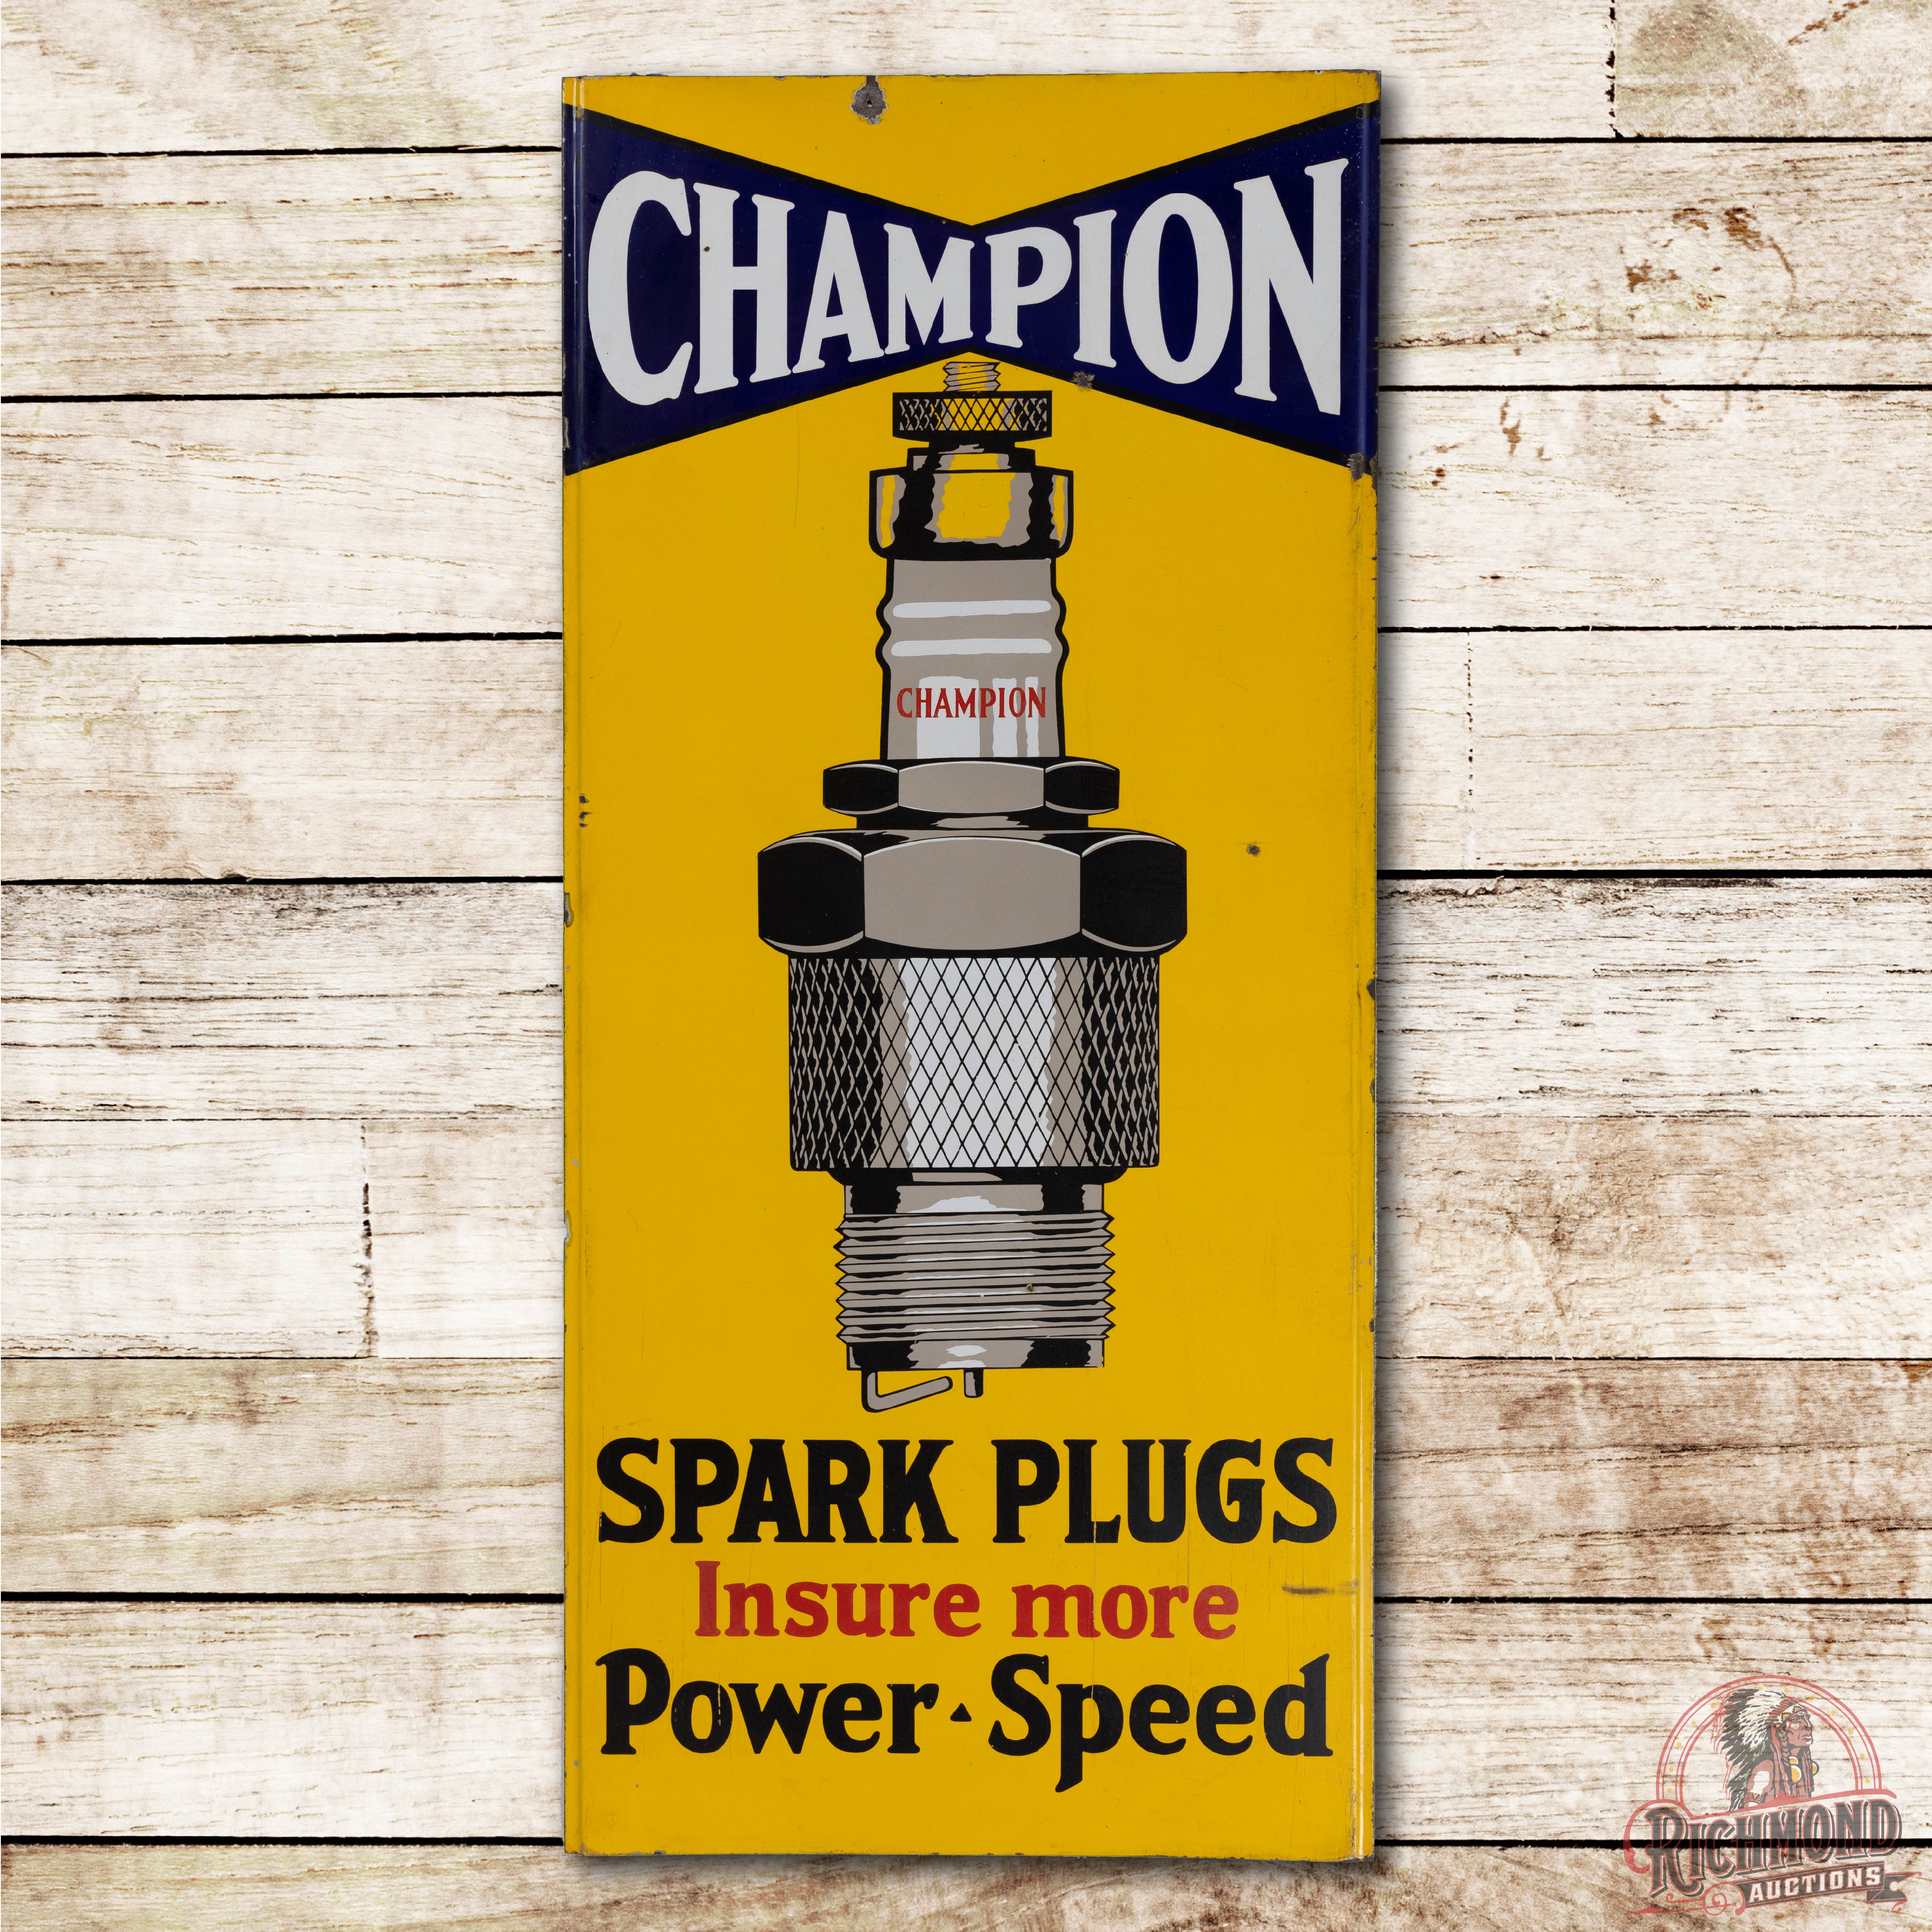 Champion Spark Plugs Insure More Power-Speed Single Sided